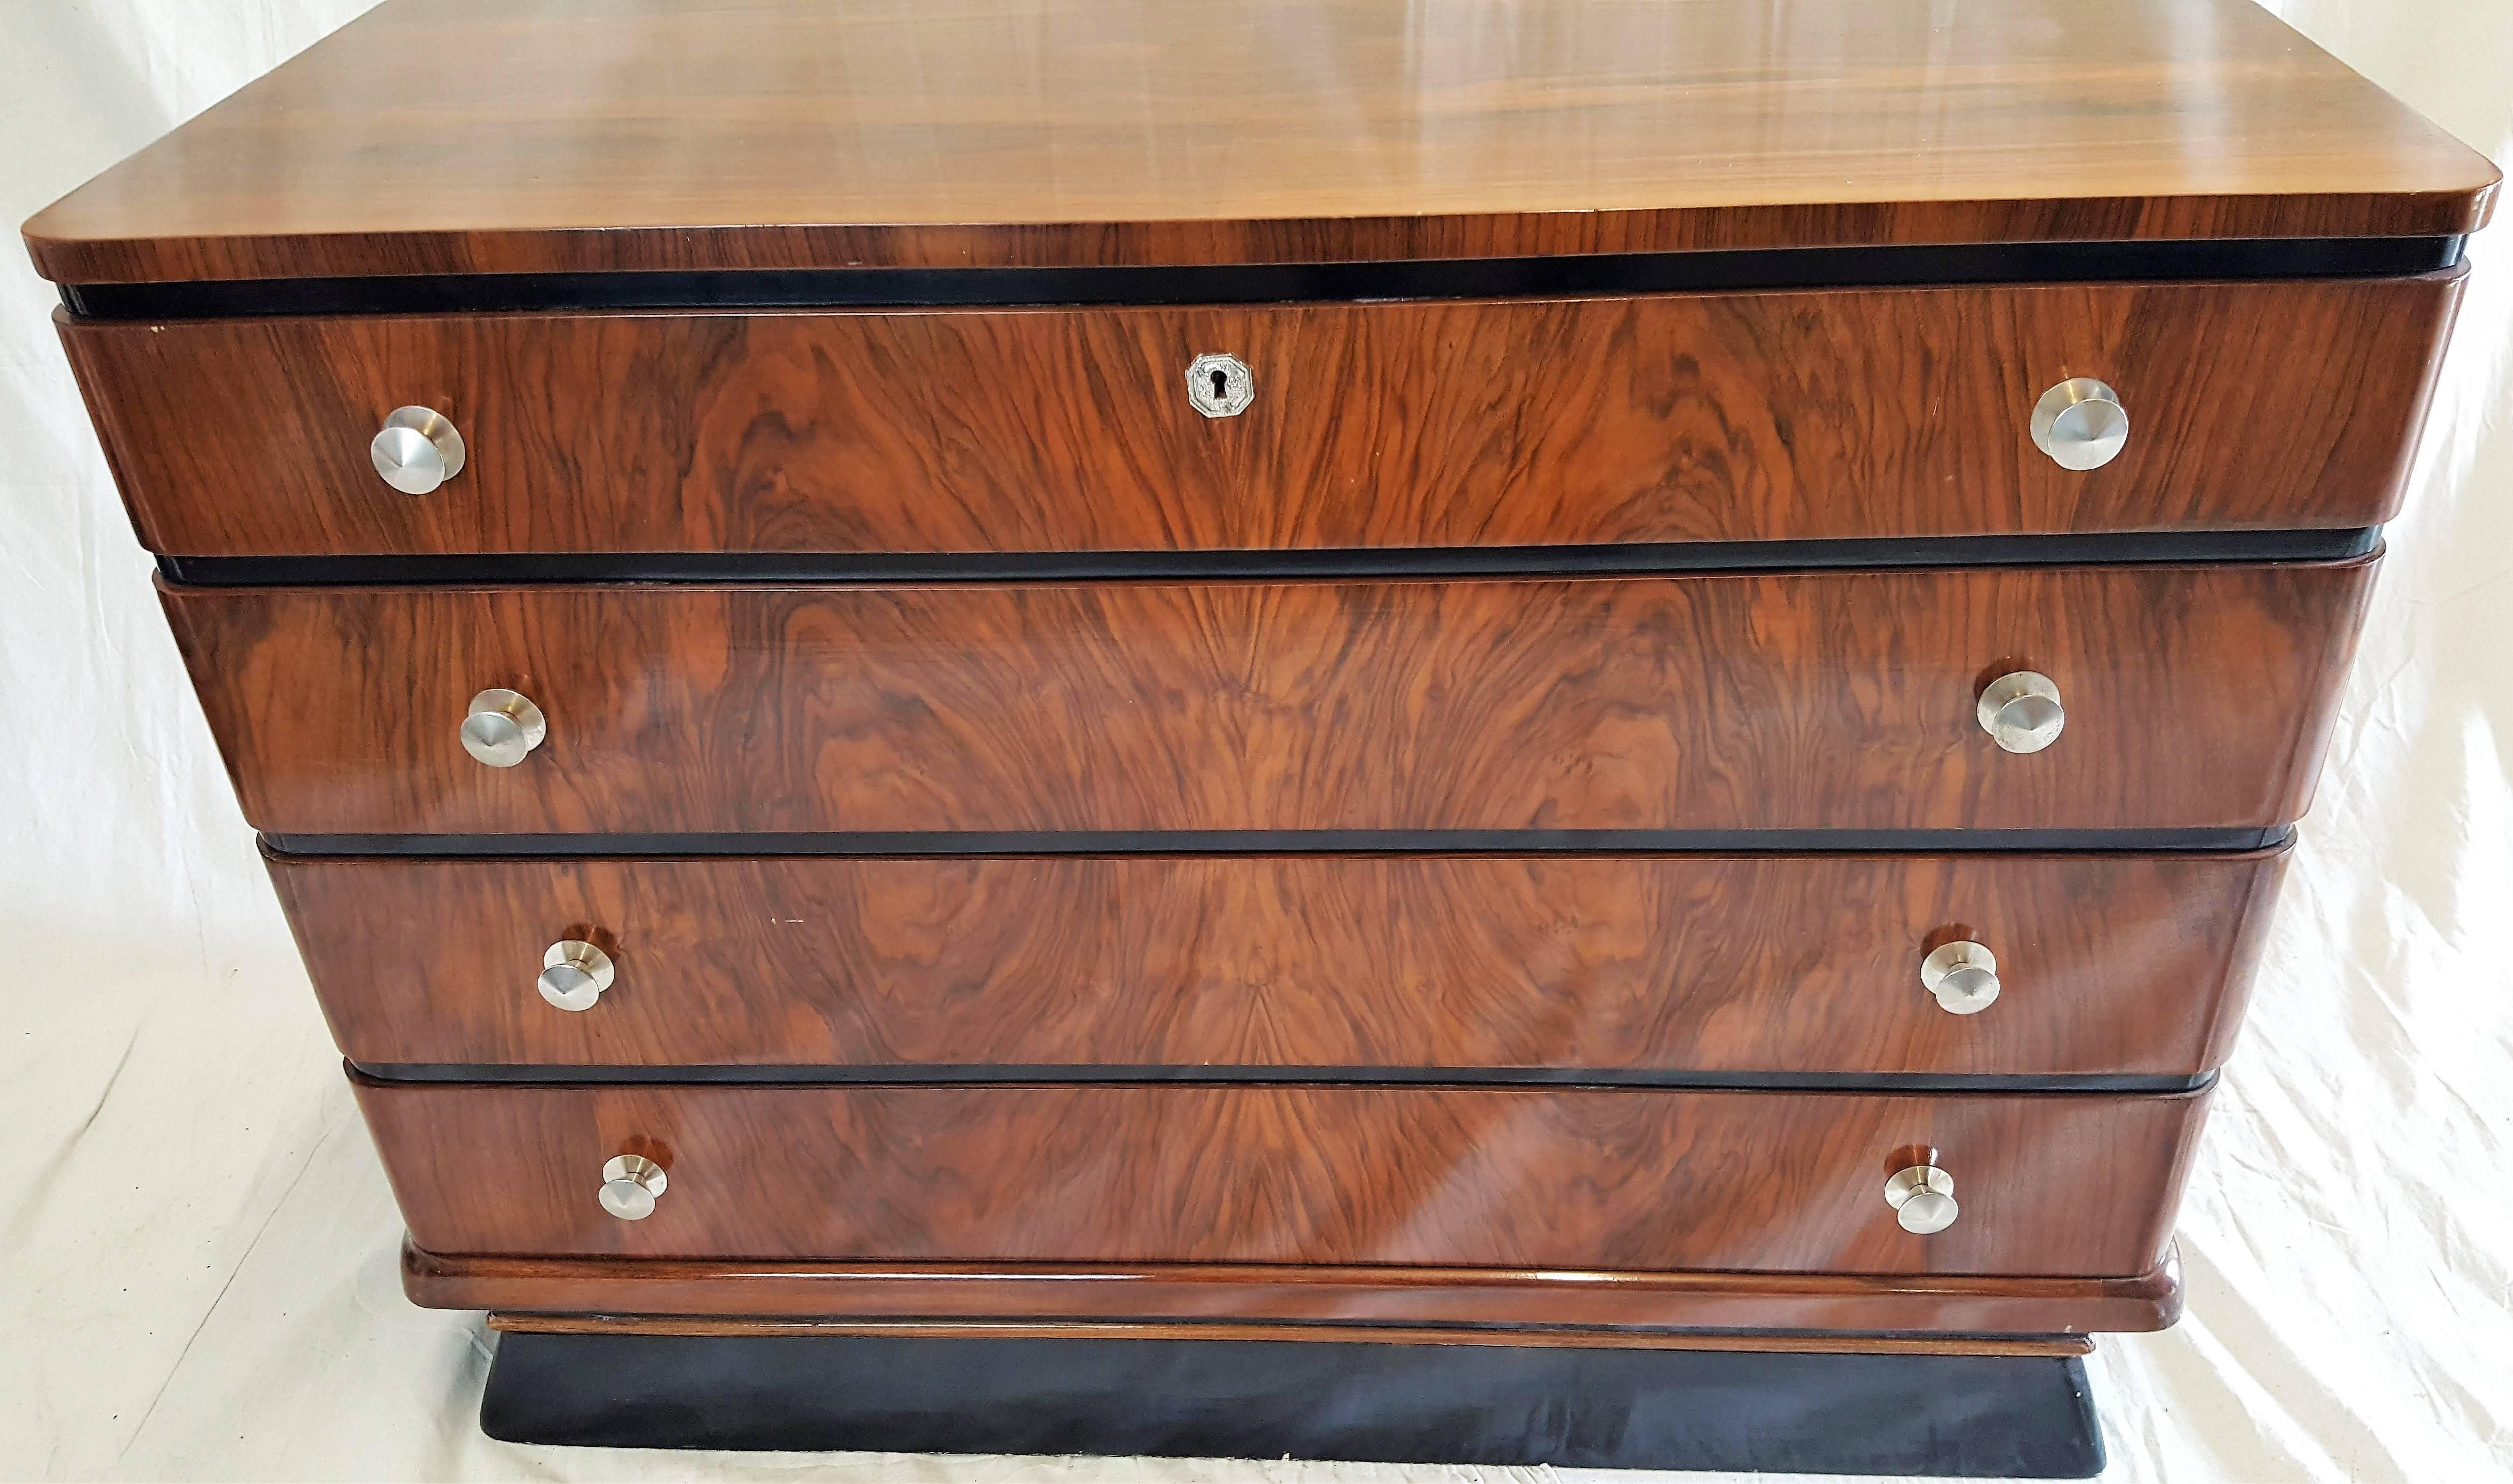 Four-drawer 1940s Art Deco Brazilian mahogany and chrome pulls with back base for strength. The technology and architecture of the deco period stands out in the curved corners, ebonized space between drawers and the base connecting to the floor.